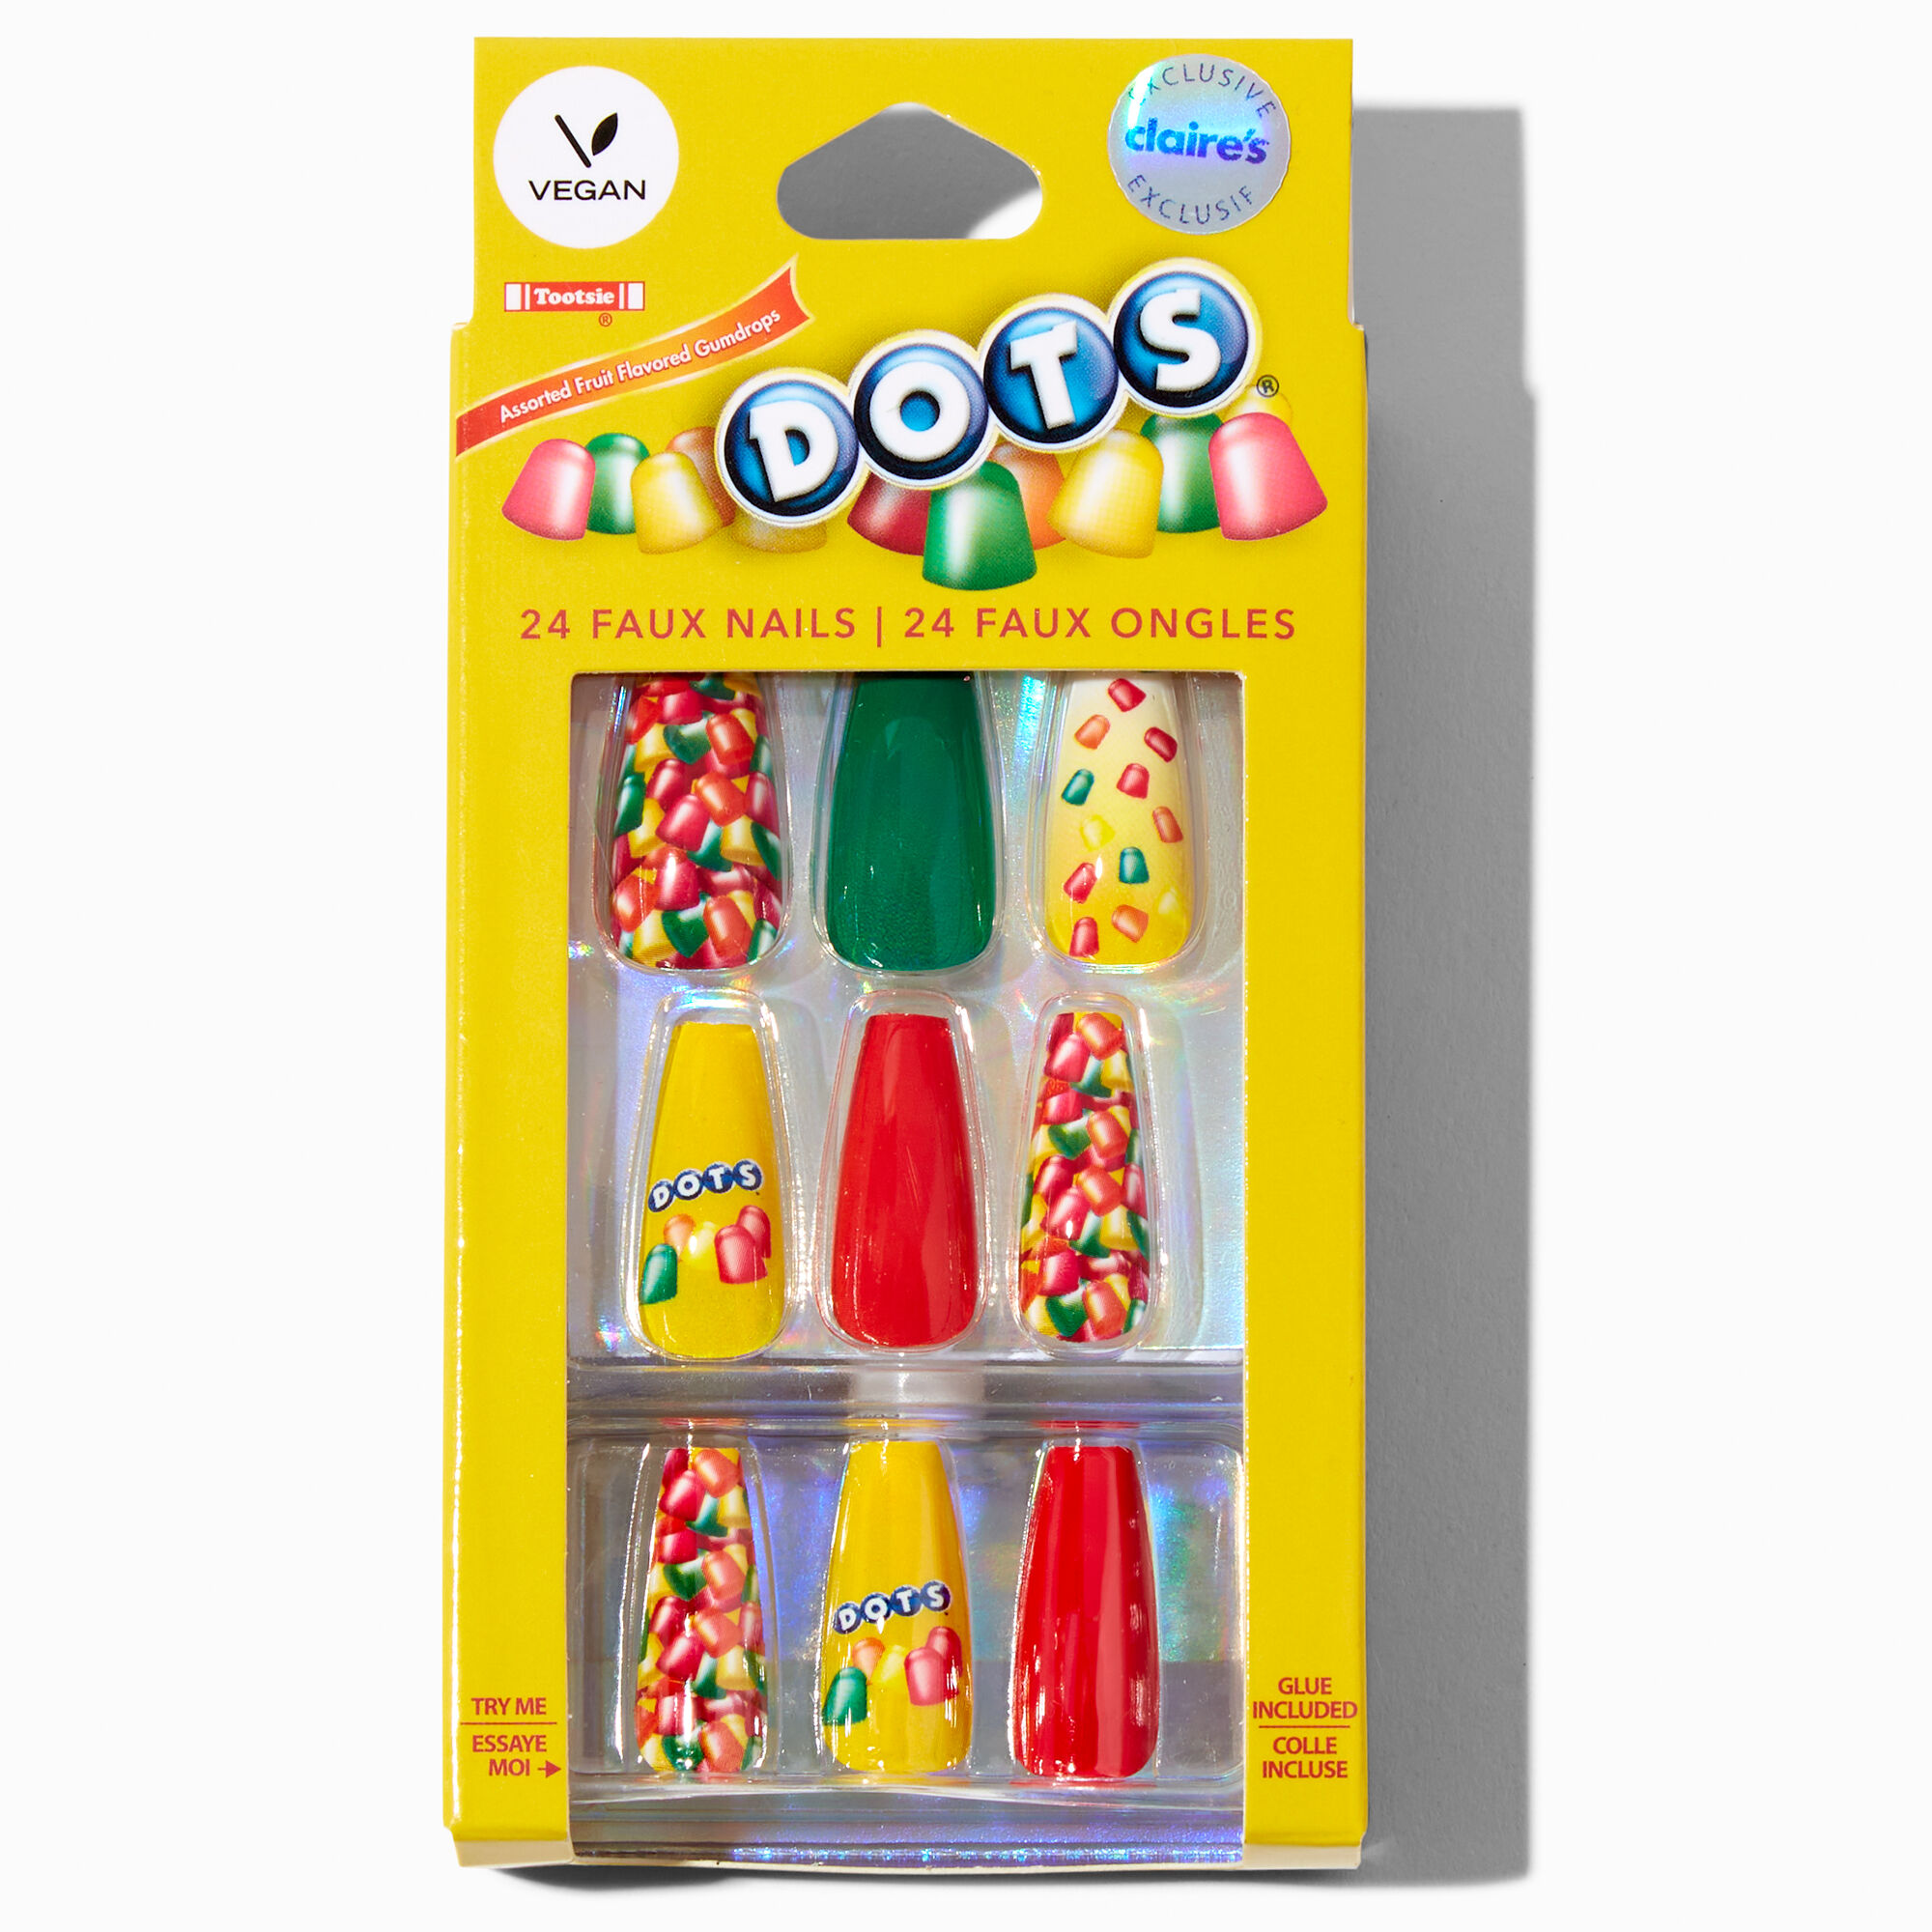 View Tootsie Dots Claires Exclusive Squareletto Vegan Faux Nail Set 24 Pack information